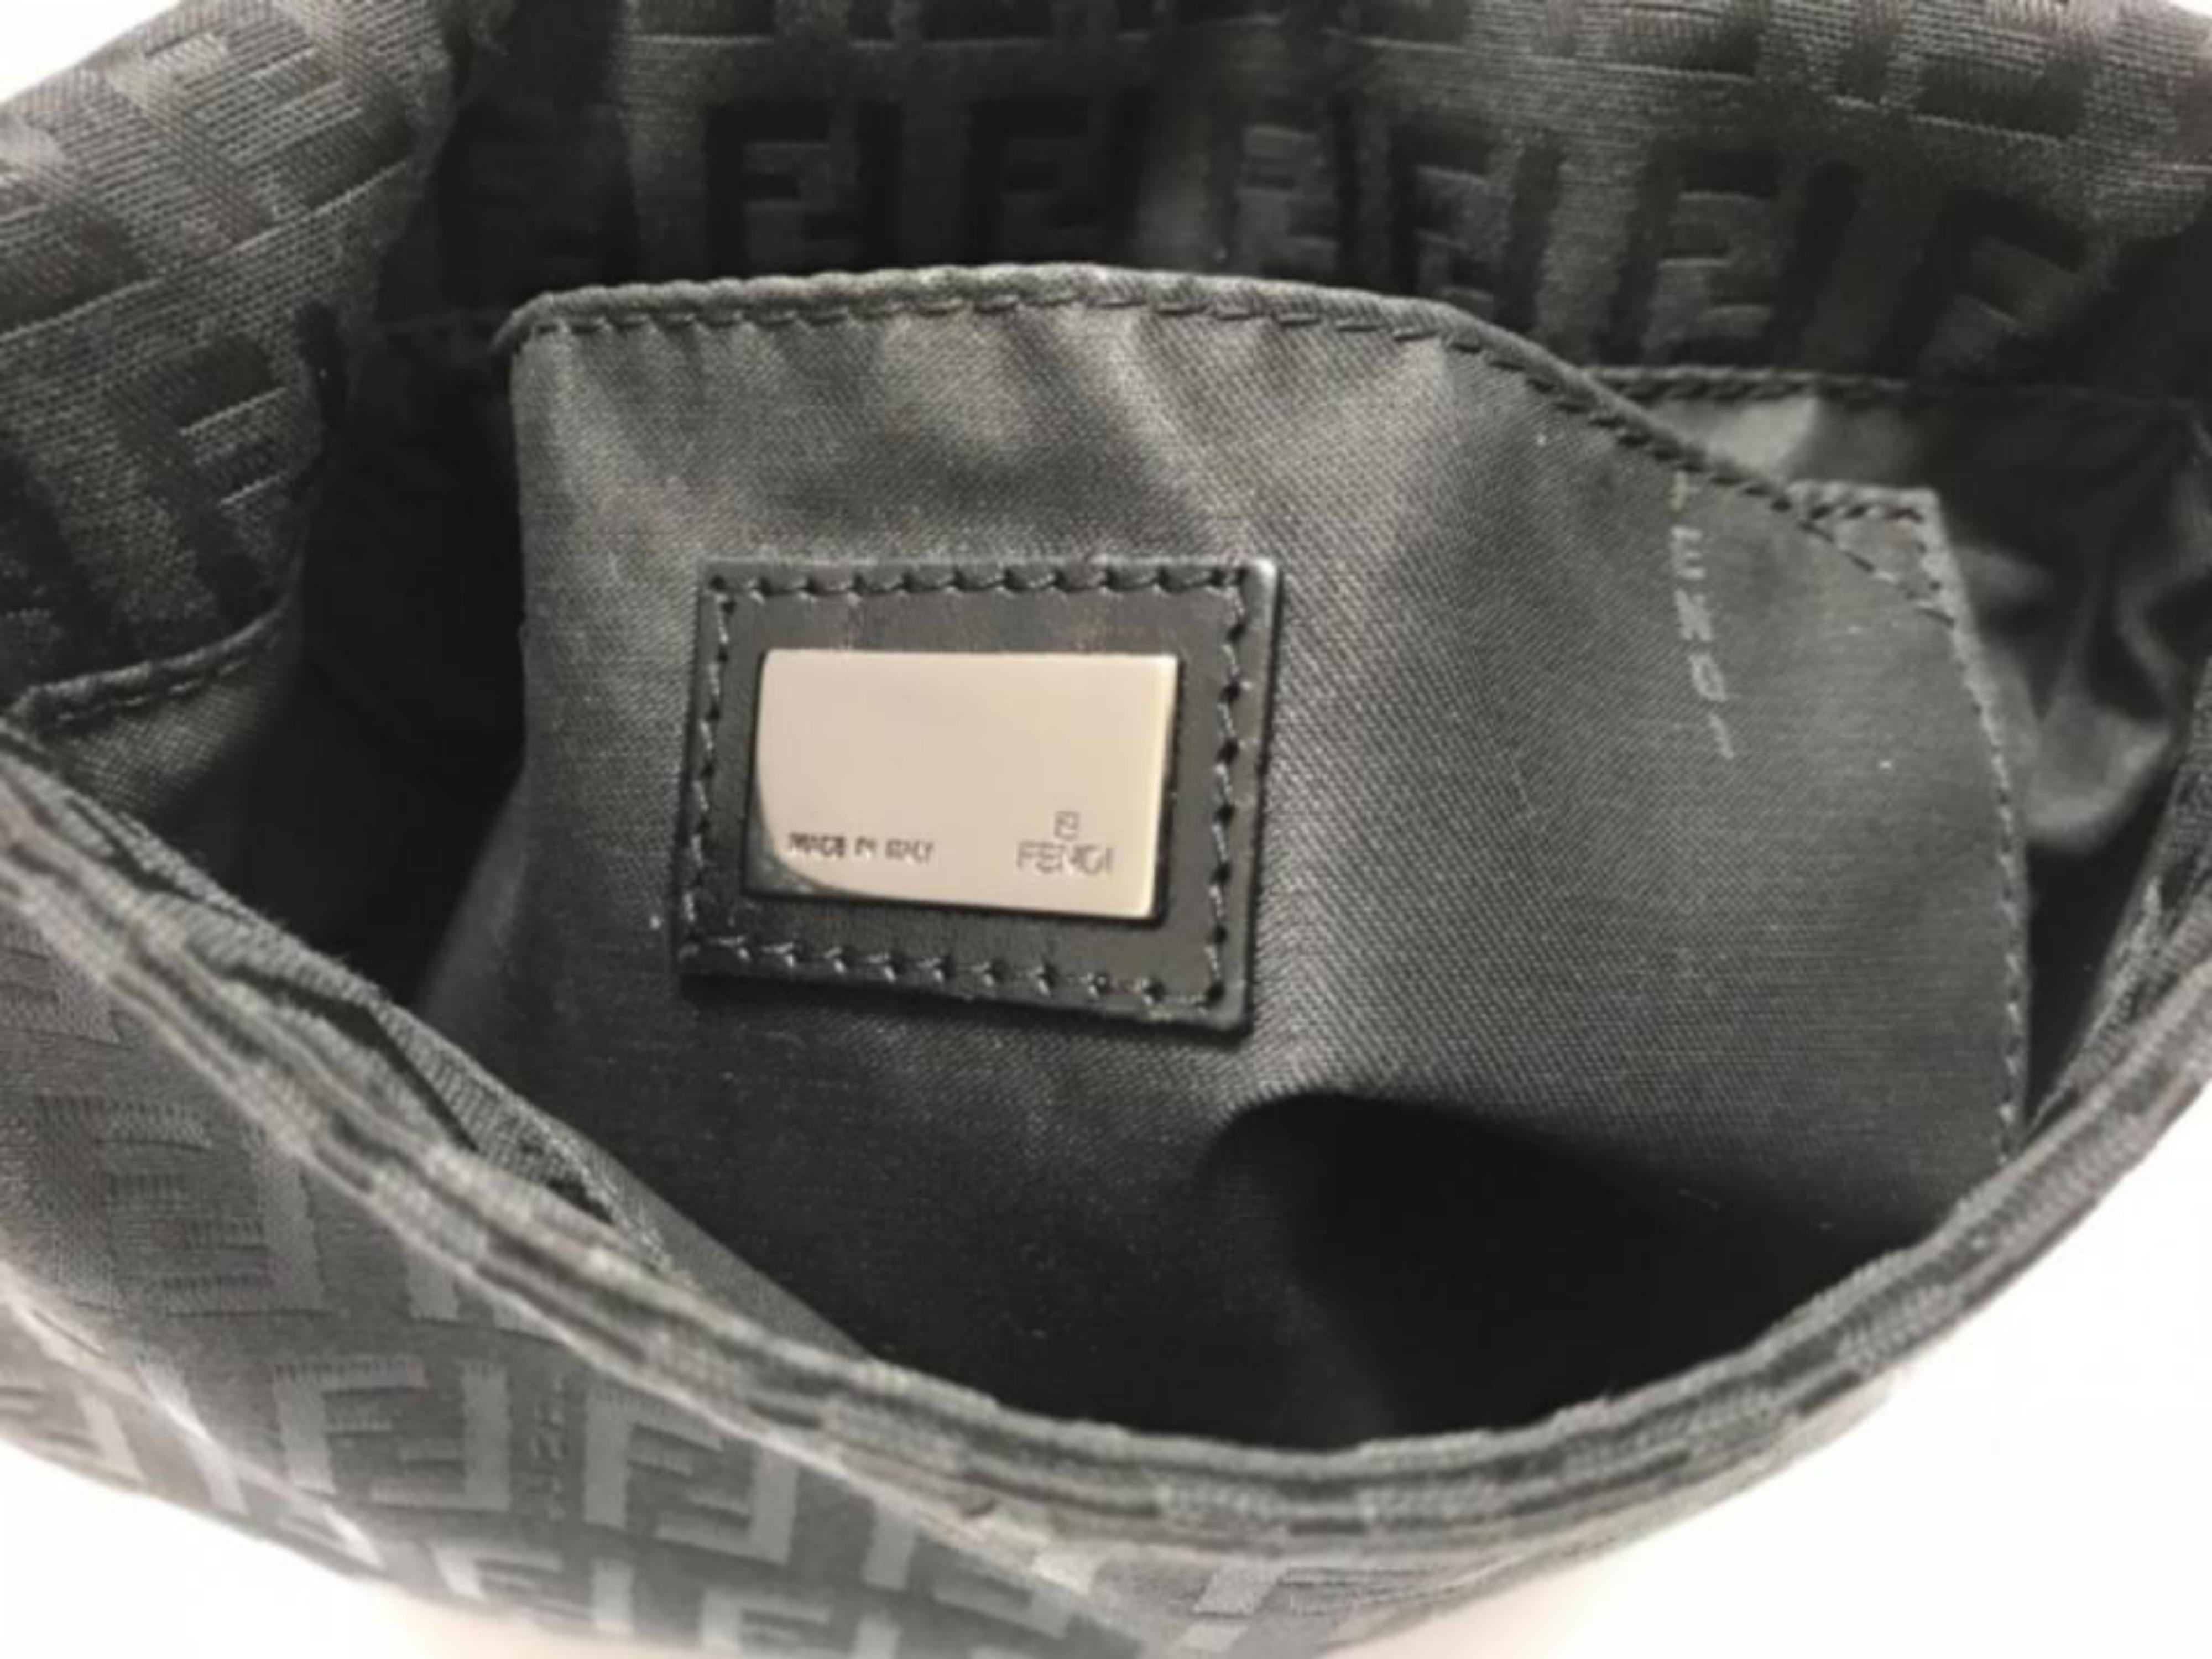 Fendi Ff Monogram 228034 Black Coated Canvas Cross Body Bag In Good Condition For Sale In Forest Hills, NY